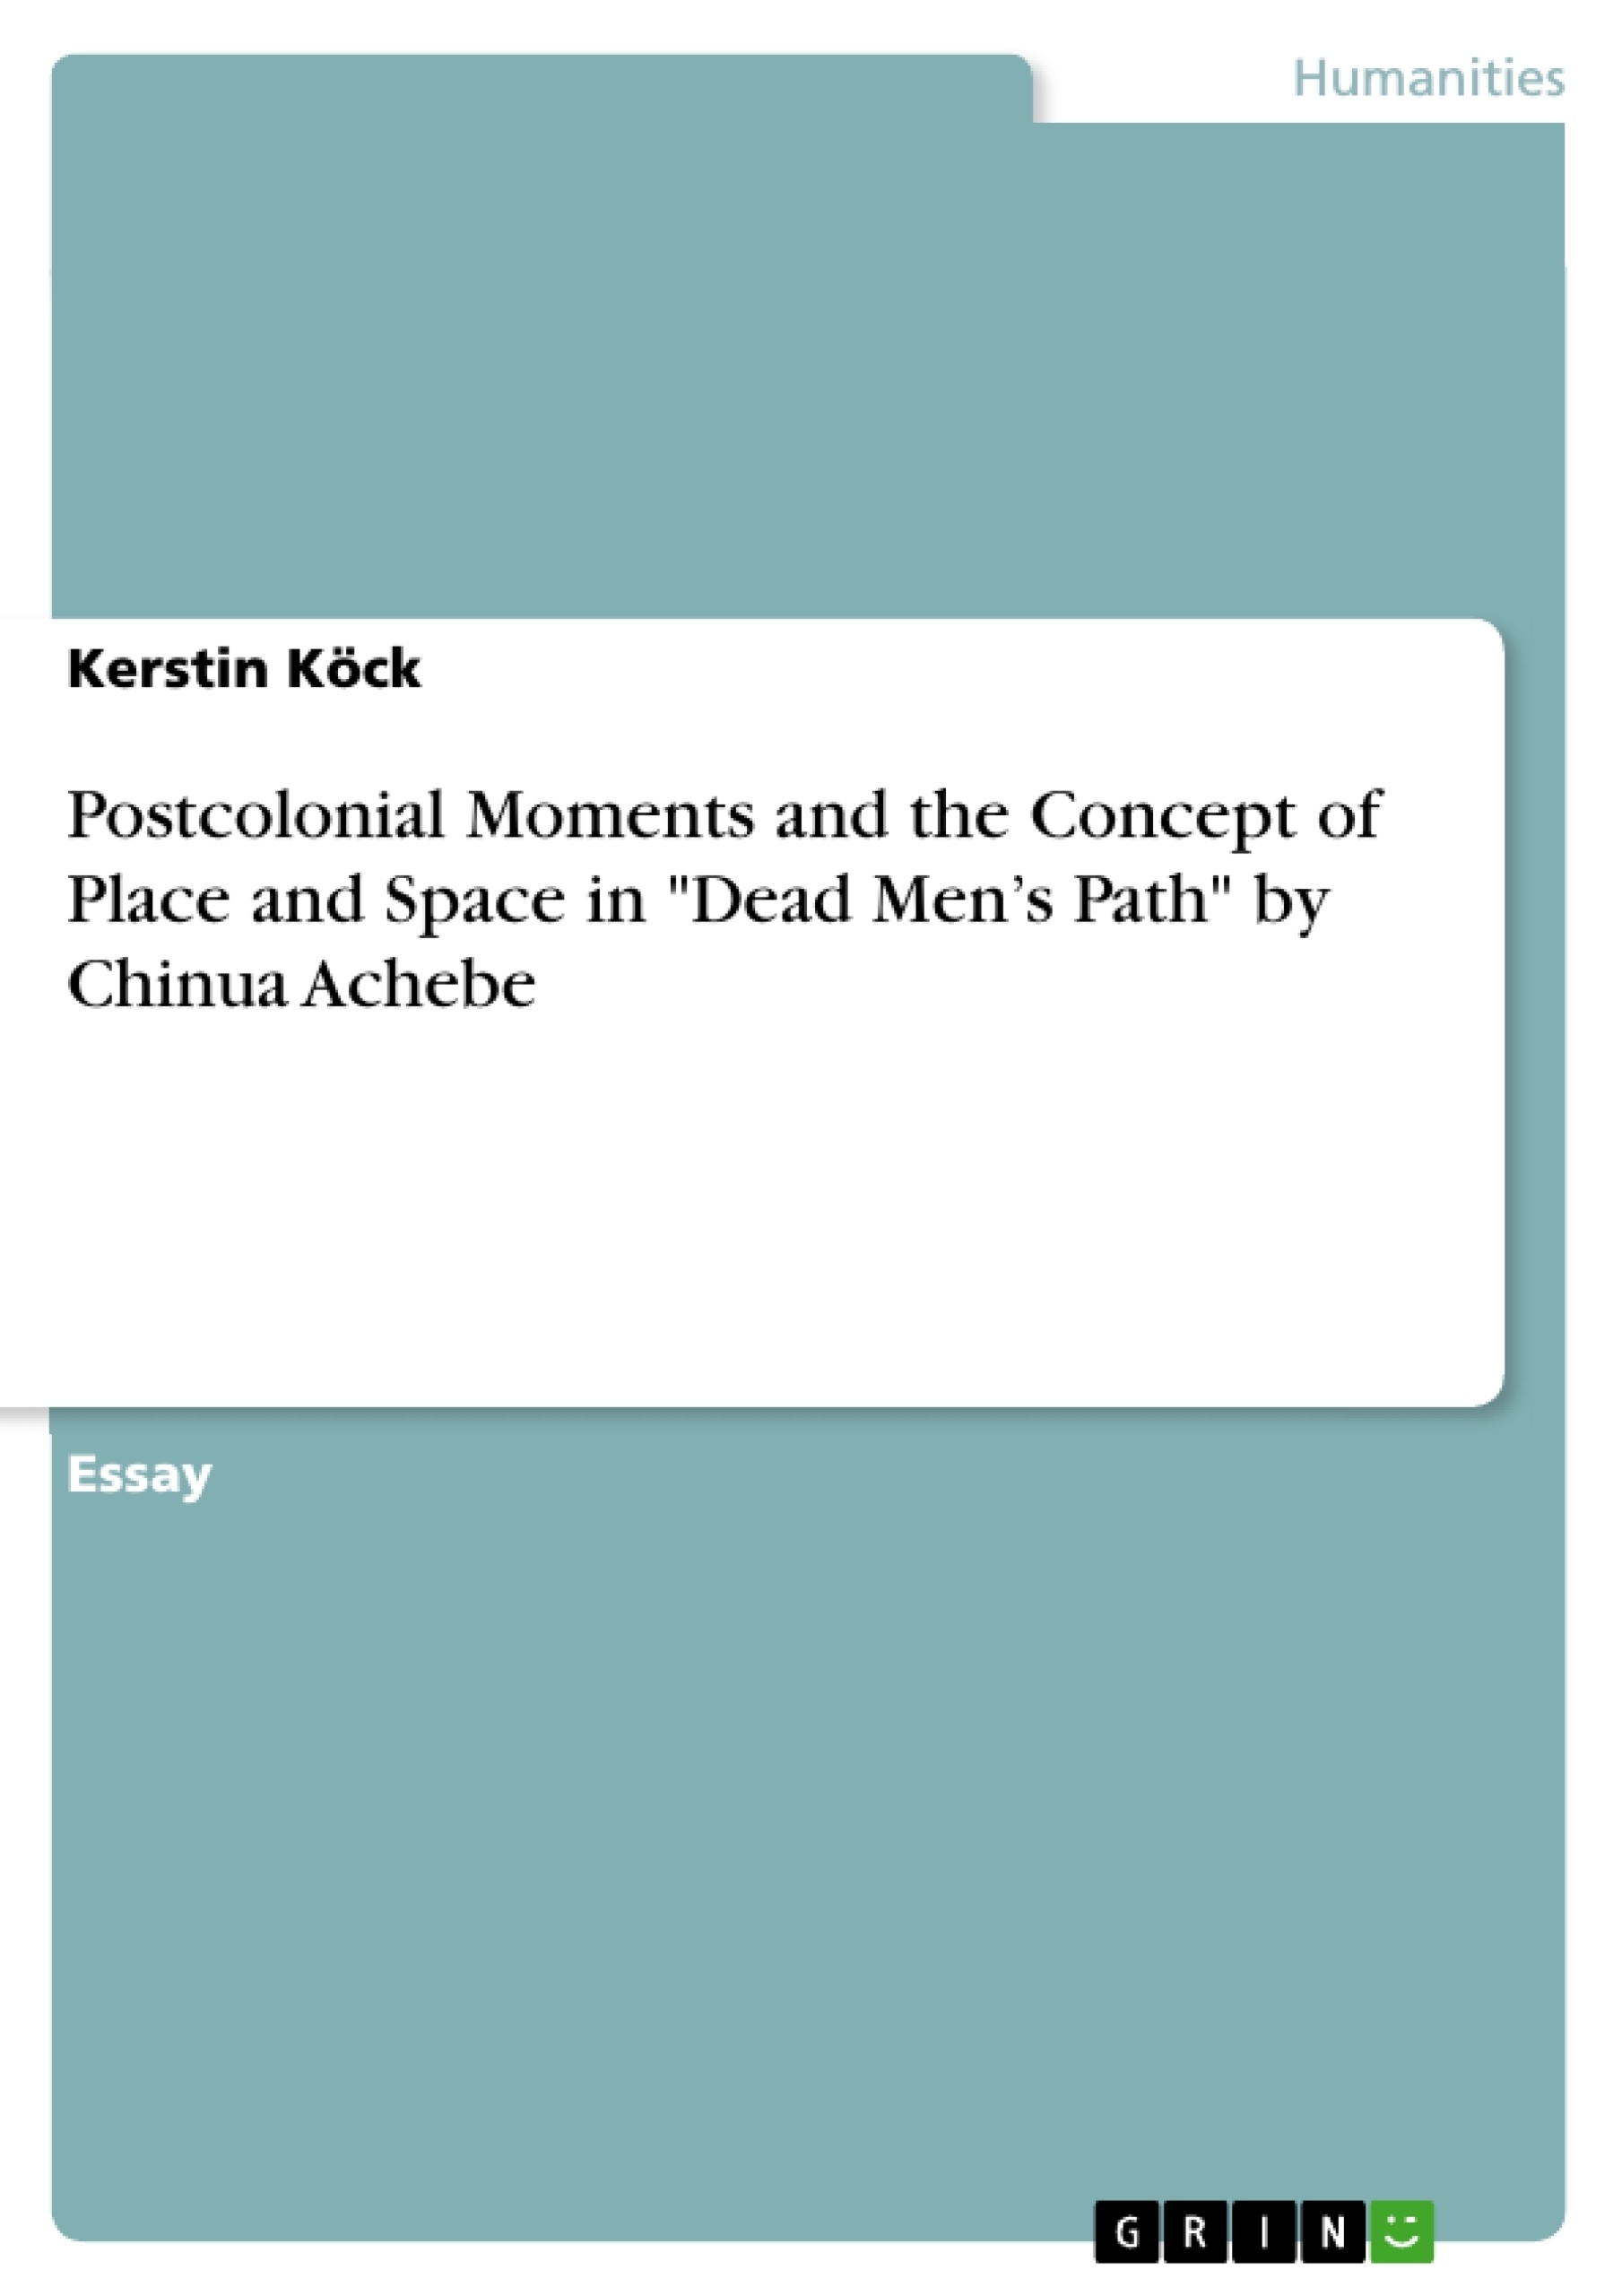 Title: Postcolonial Moments and the Concept of Place and Space in "Dead Men’s Path" by Chinua Achebe